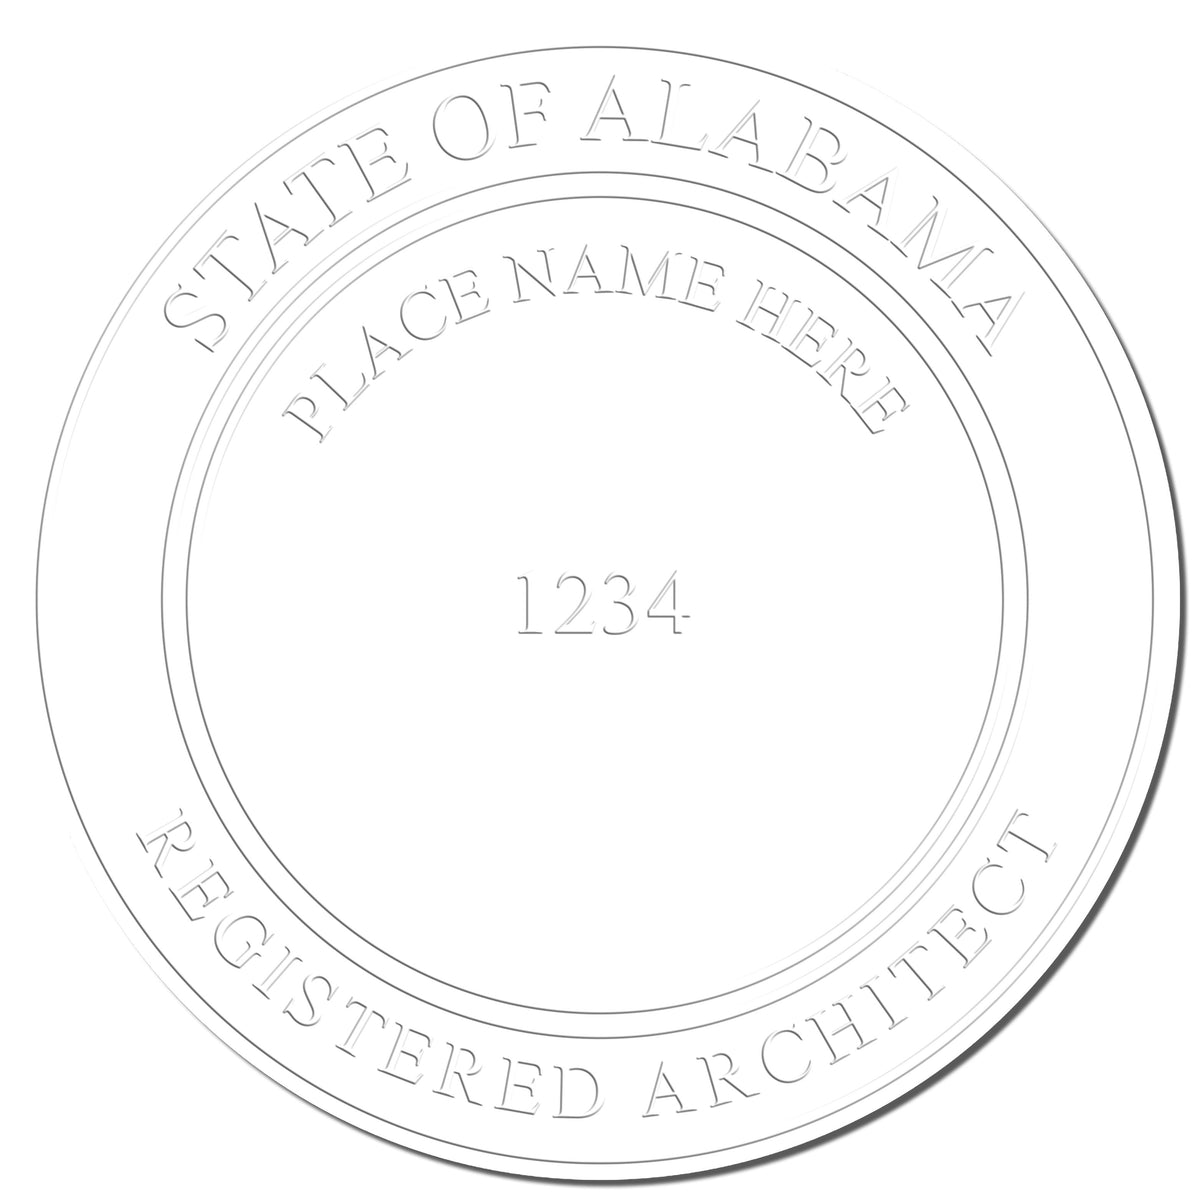 This paper is stamped with a sample imprint of the Gift Alabama Architect Seal, signifying its quality and reliability.